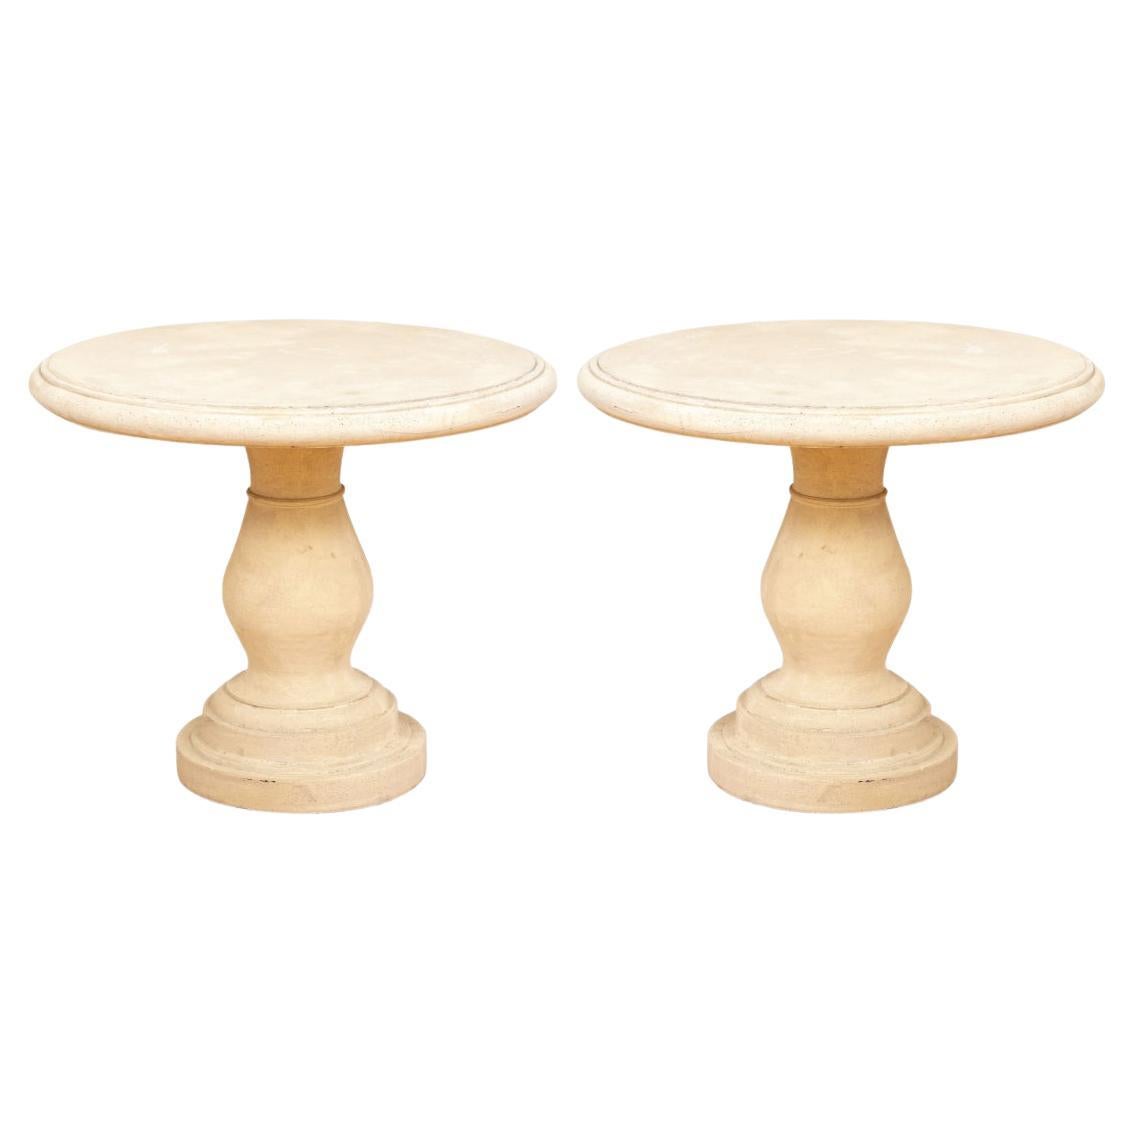 Sophisticated Pair Of Cast Faux Stone Round Pedestal Side Tables